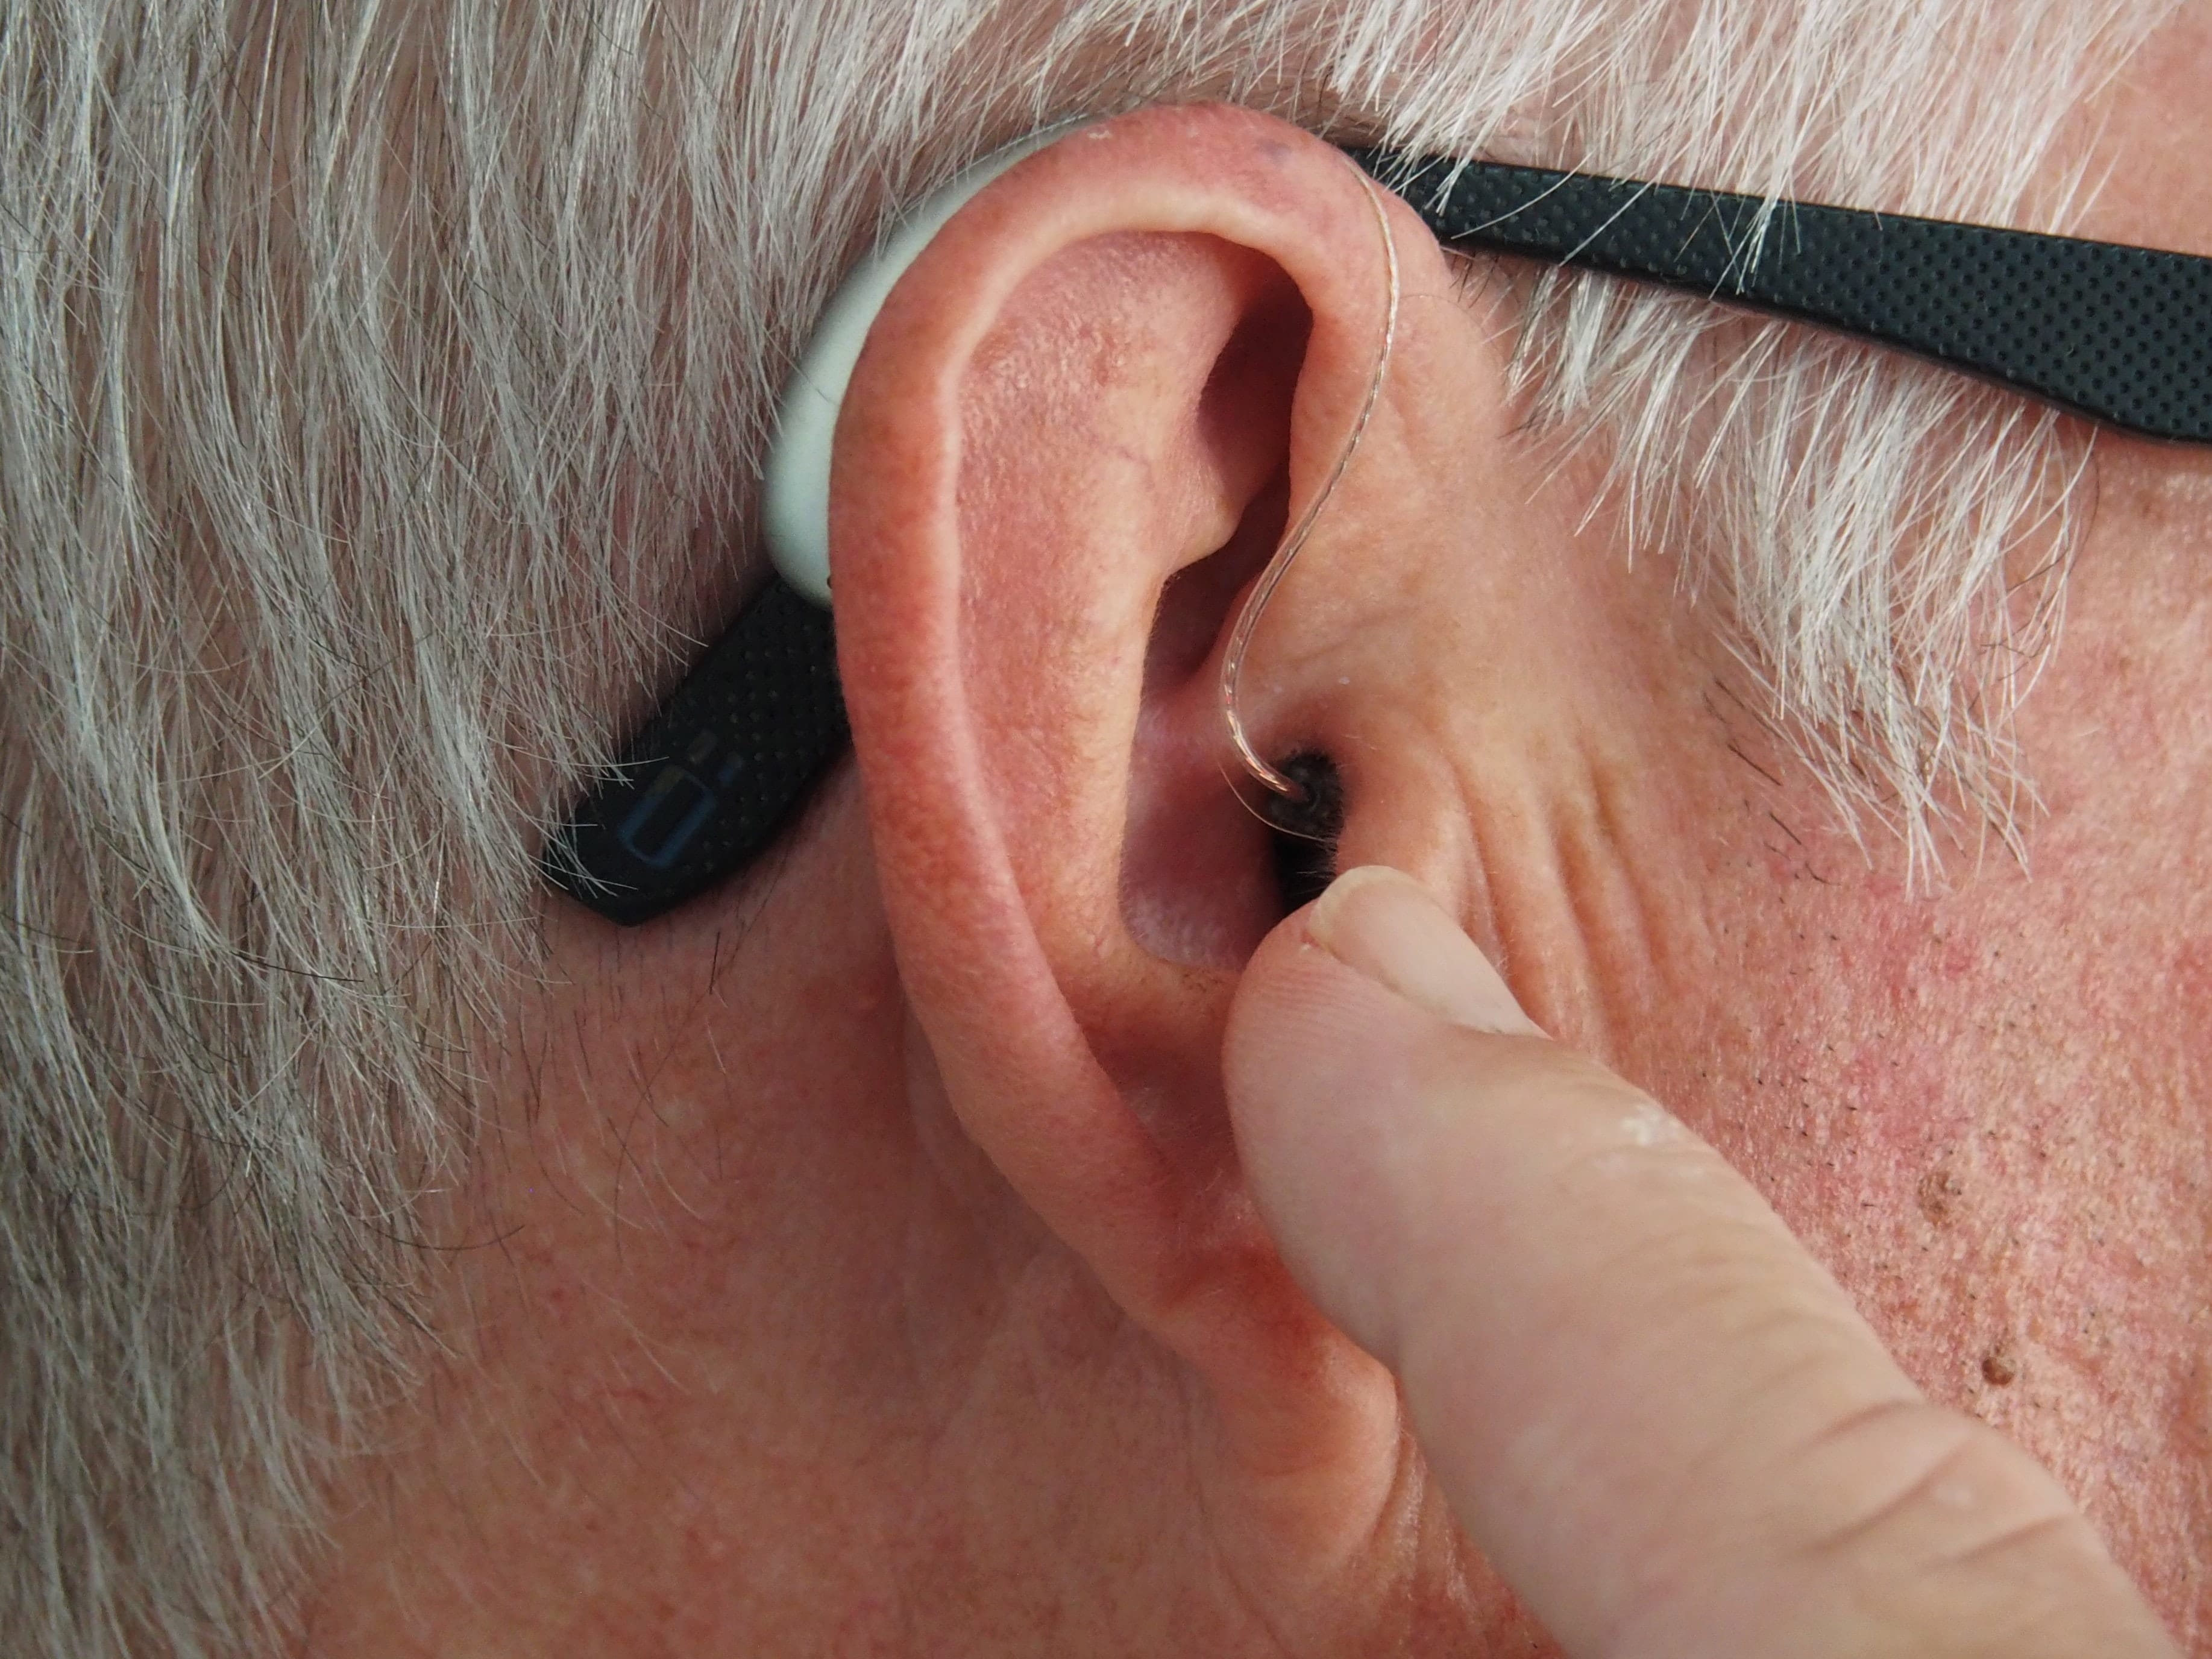 Older man touching his hearing aid while it's in his ear